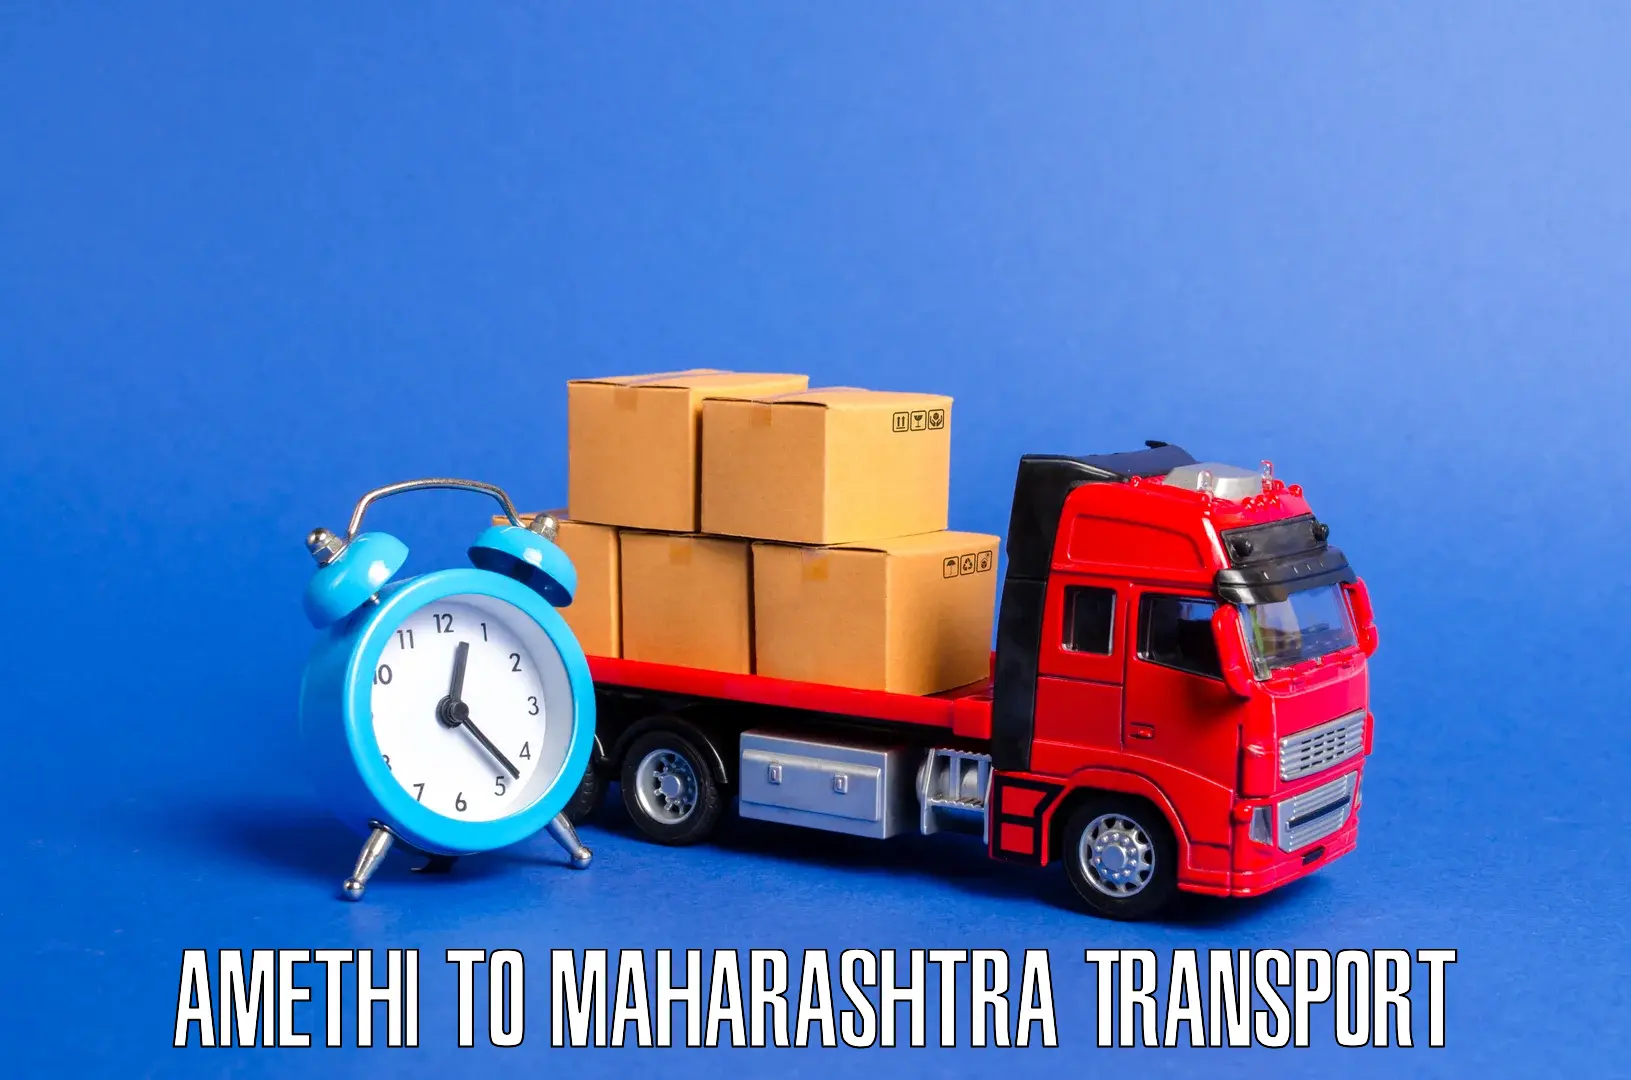 Container transport service Amethi to Mahim